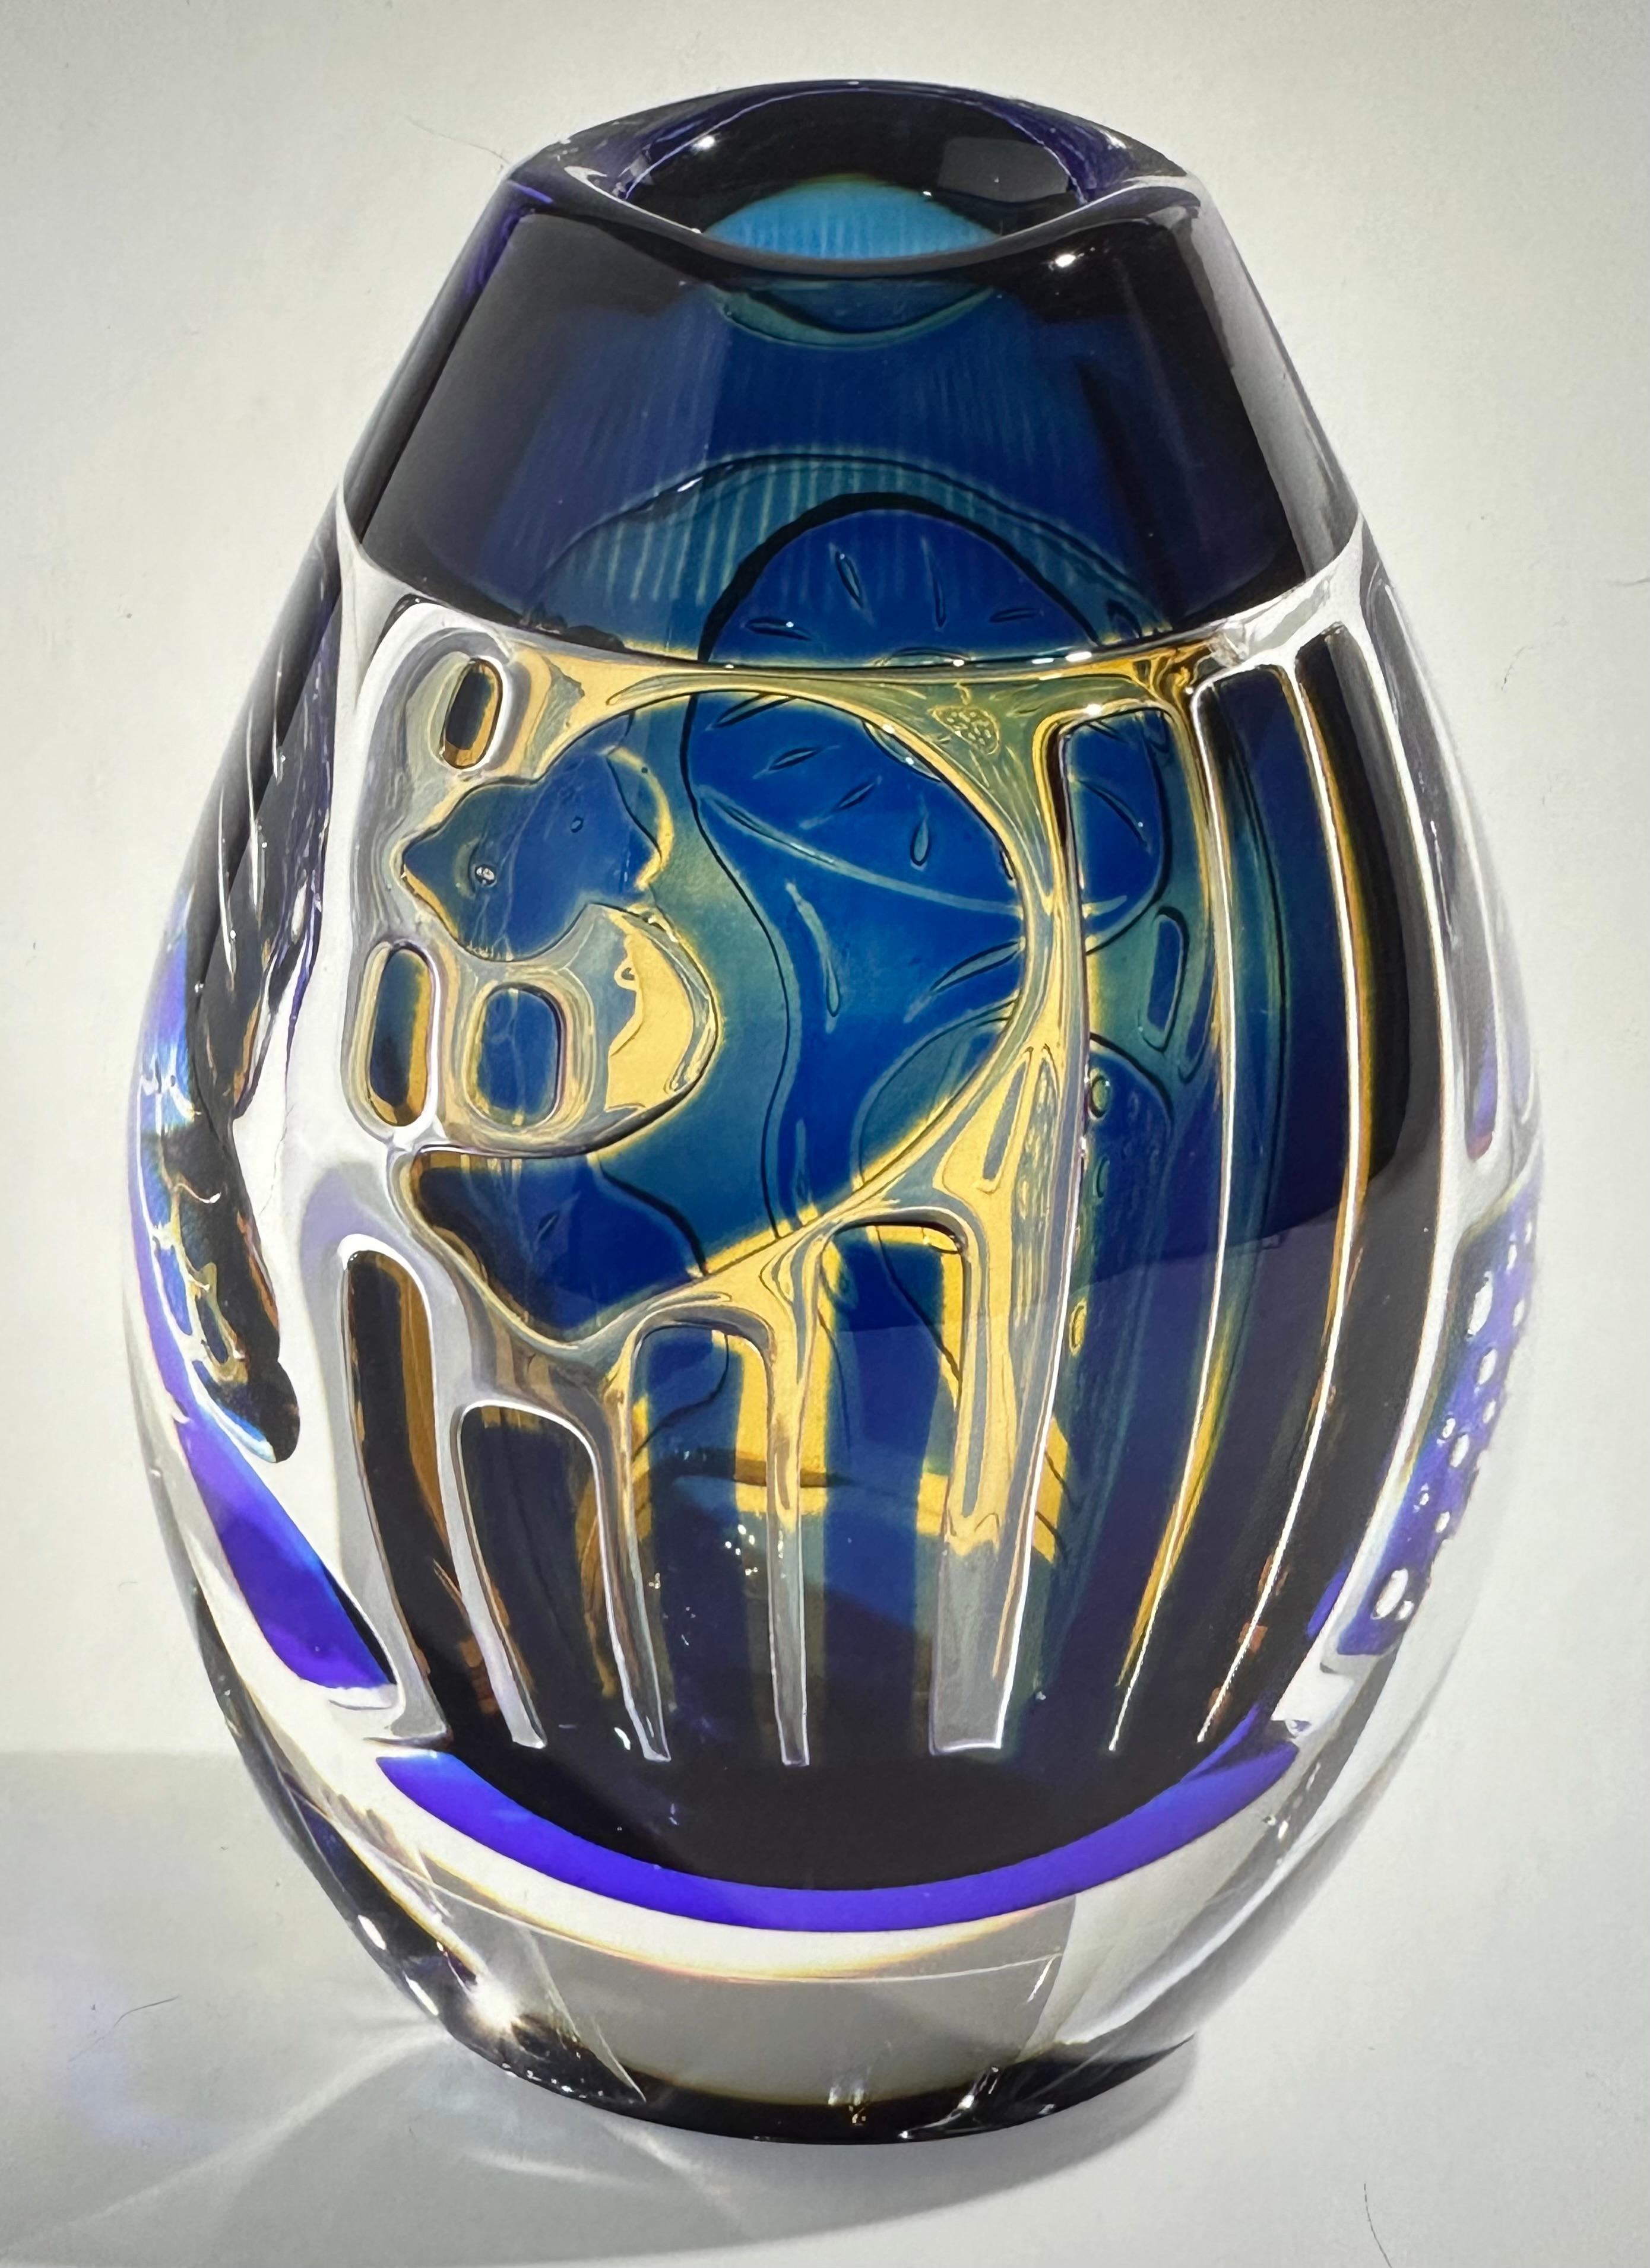 Mid-20th Century Edvin Ohrstrom Orrefors Ariel Art Glass Vase in vibrant blue and yellow Signed  For Sale